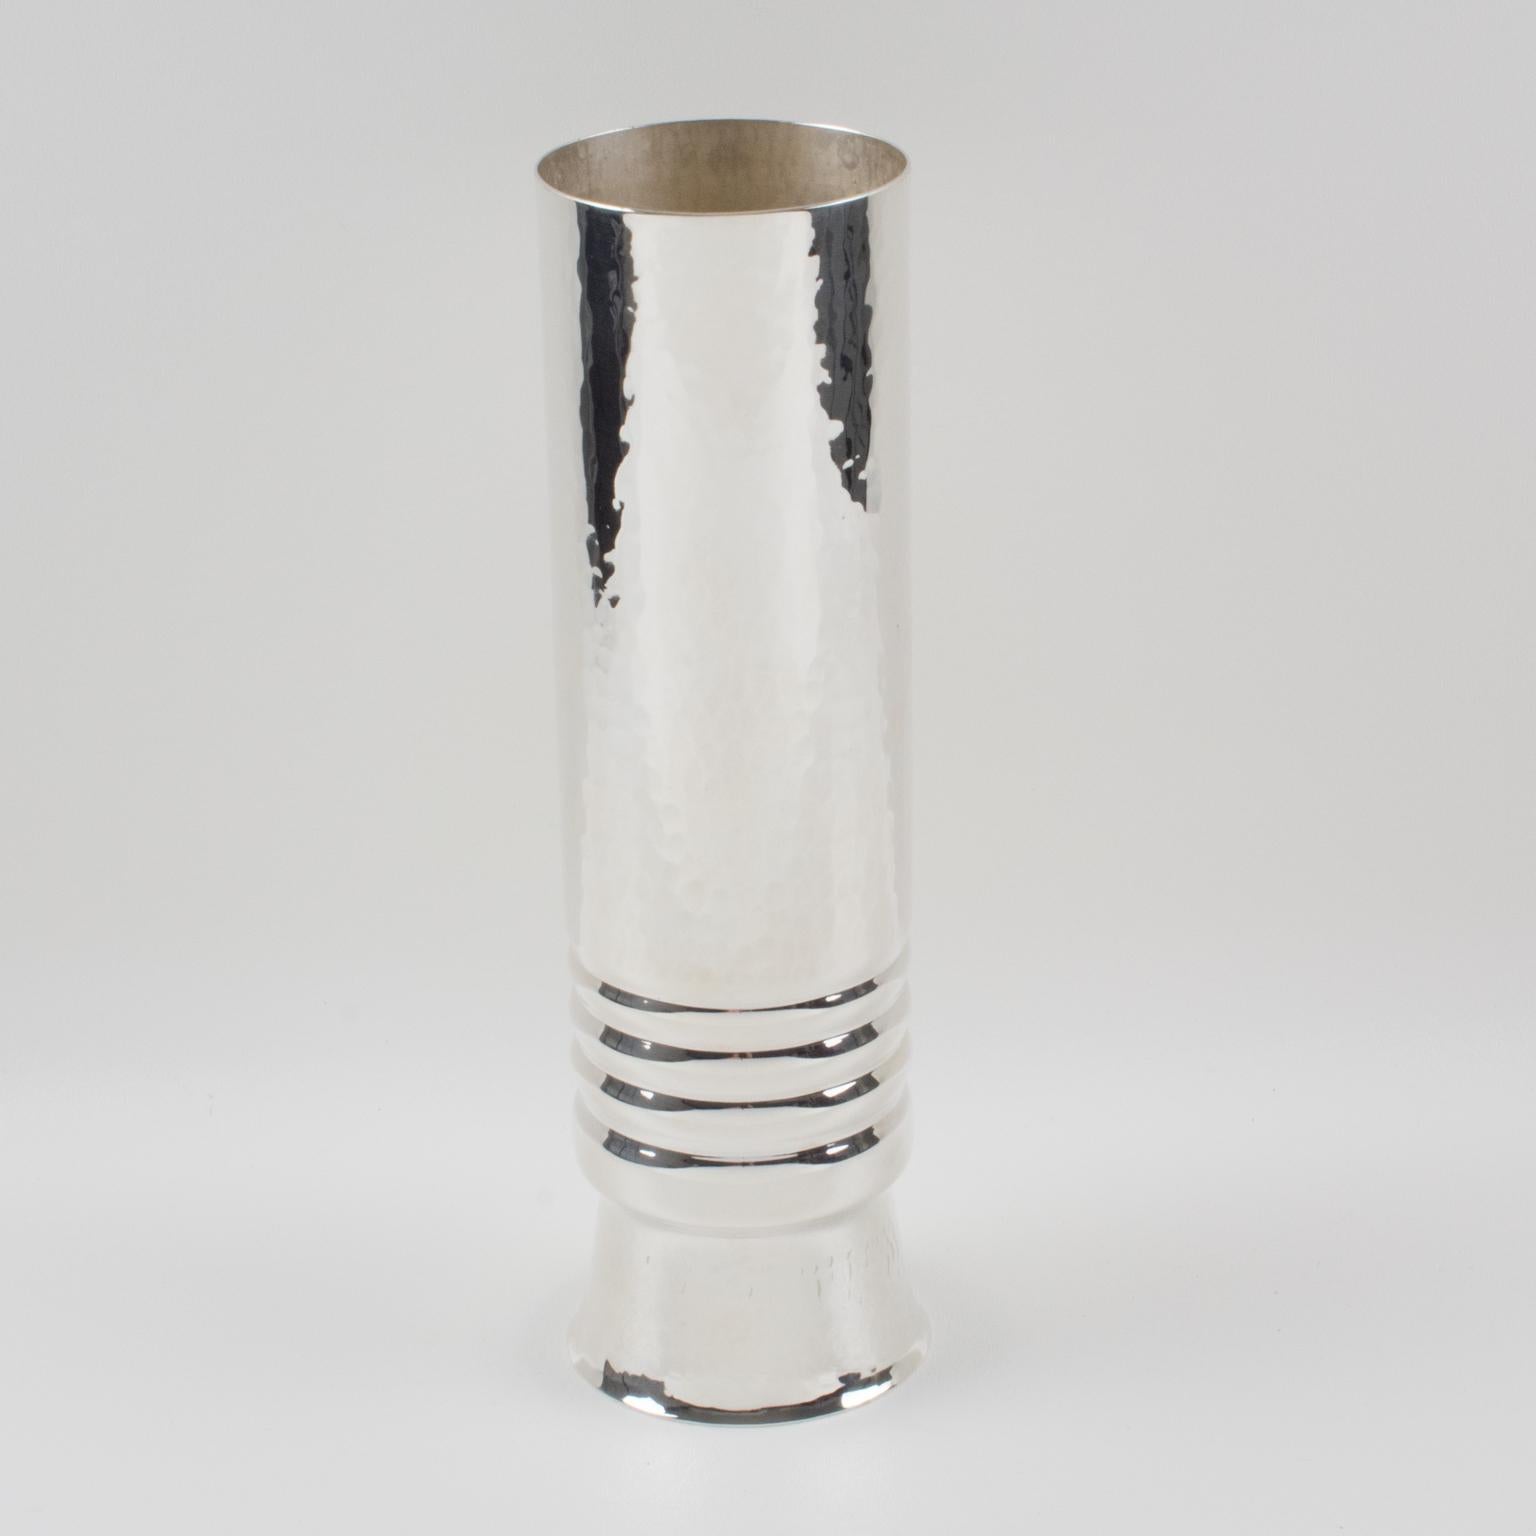 A lovely tall silver plate vase crafted by the Italian silversmith designer B.F. The design features a streamlined tumbler geometric shape with a light embossed hammered pattern. The hallmark on the underside reads 